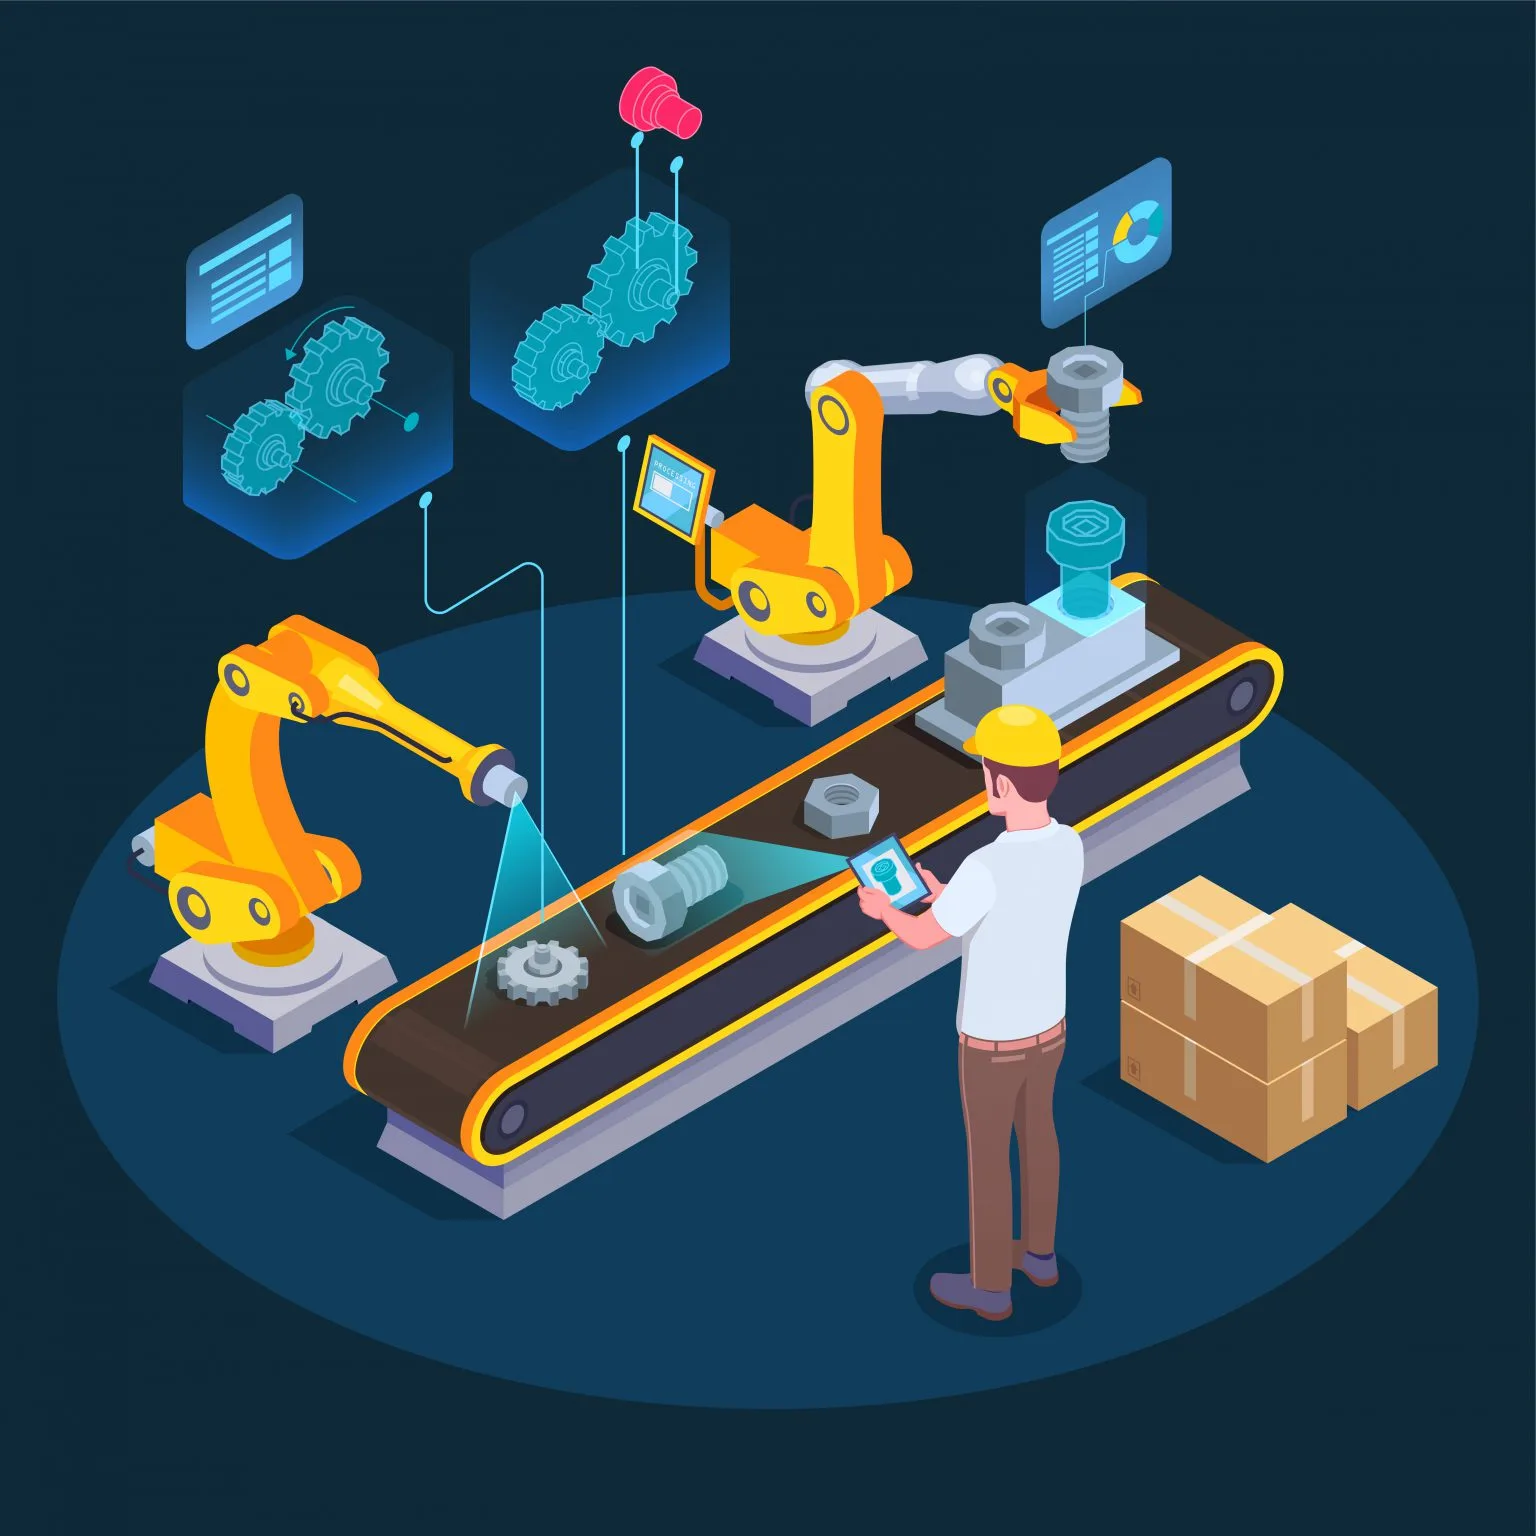 Why manufacturing industries need digital transformation